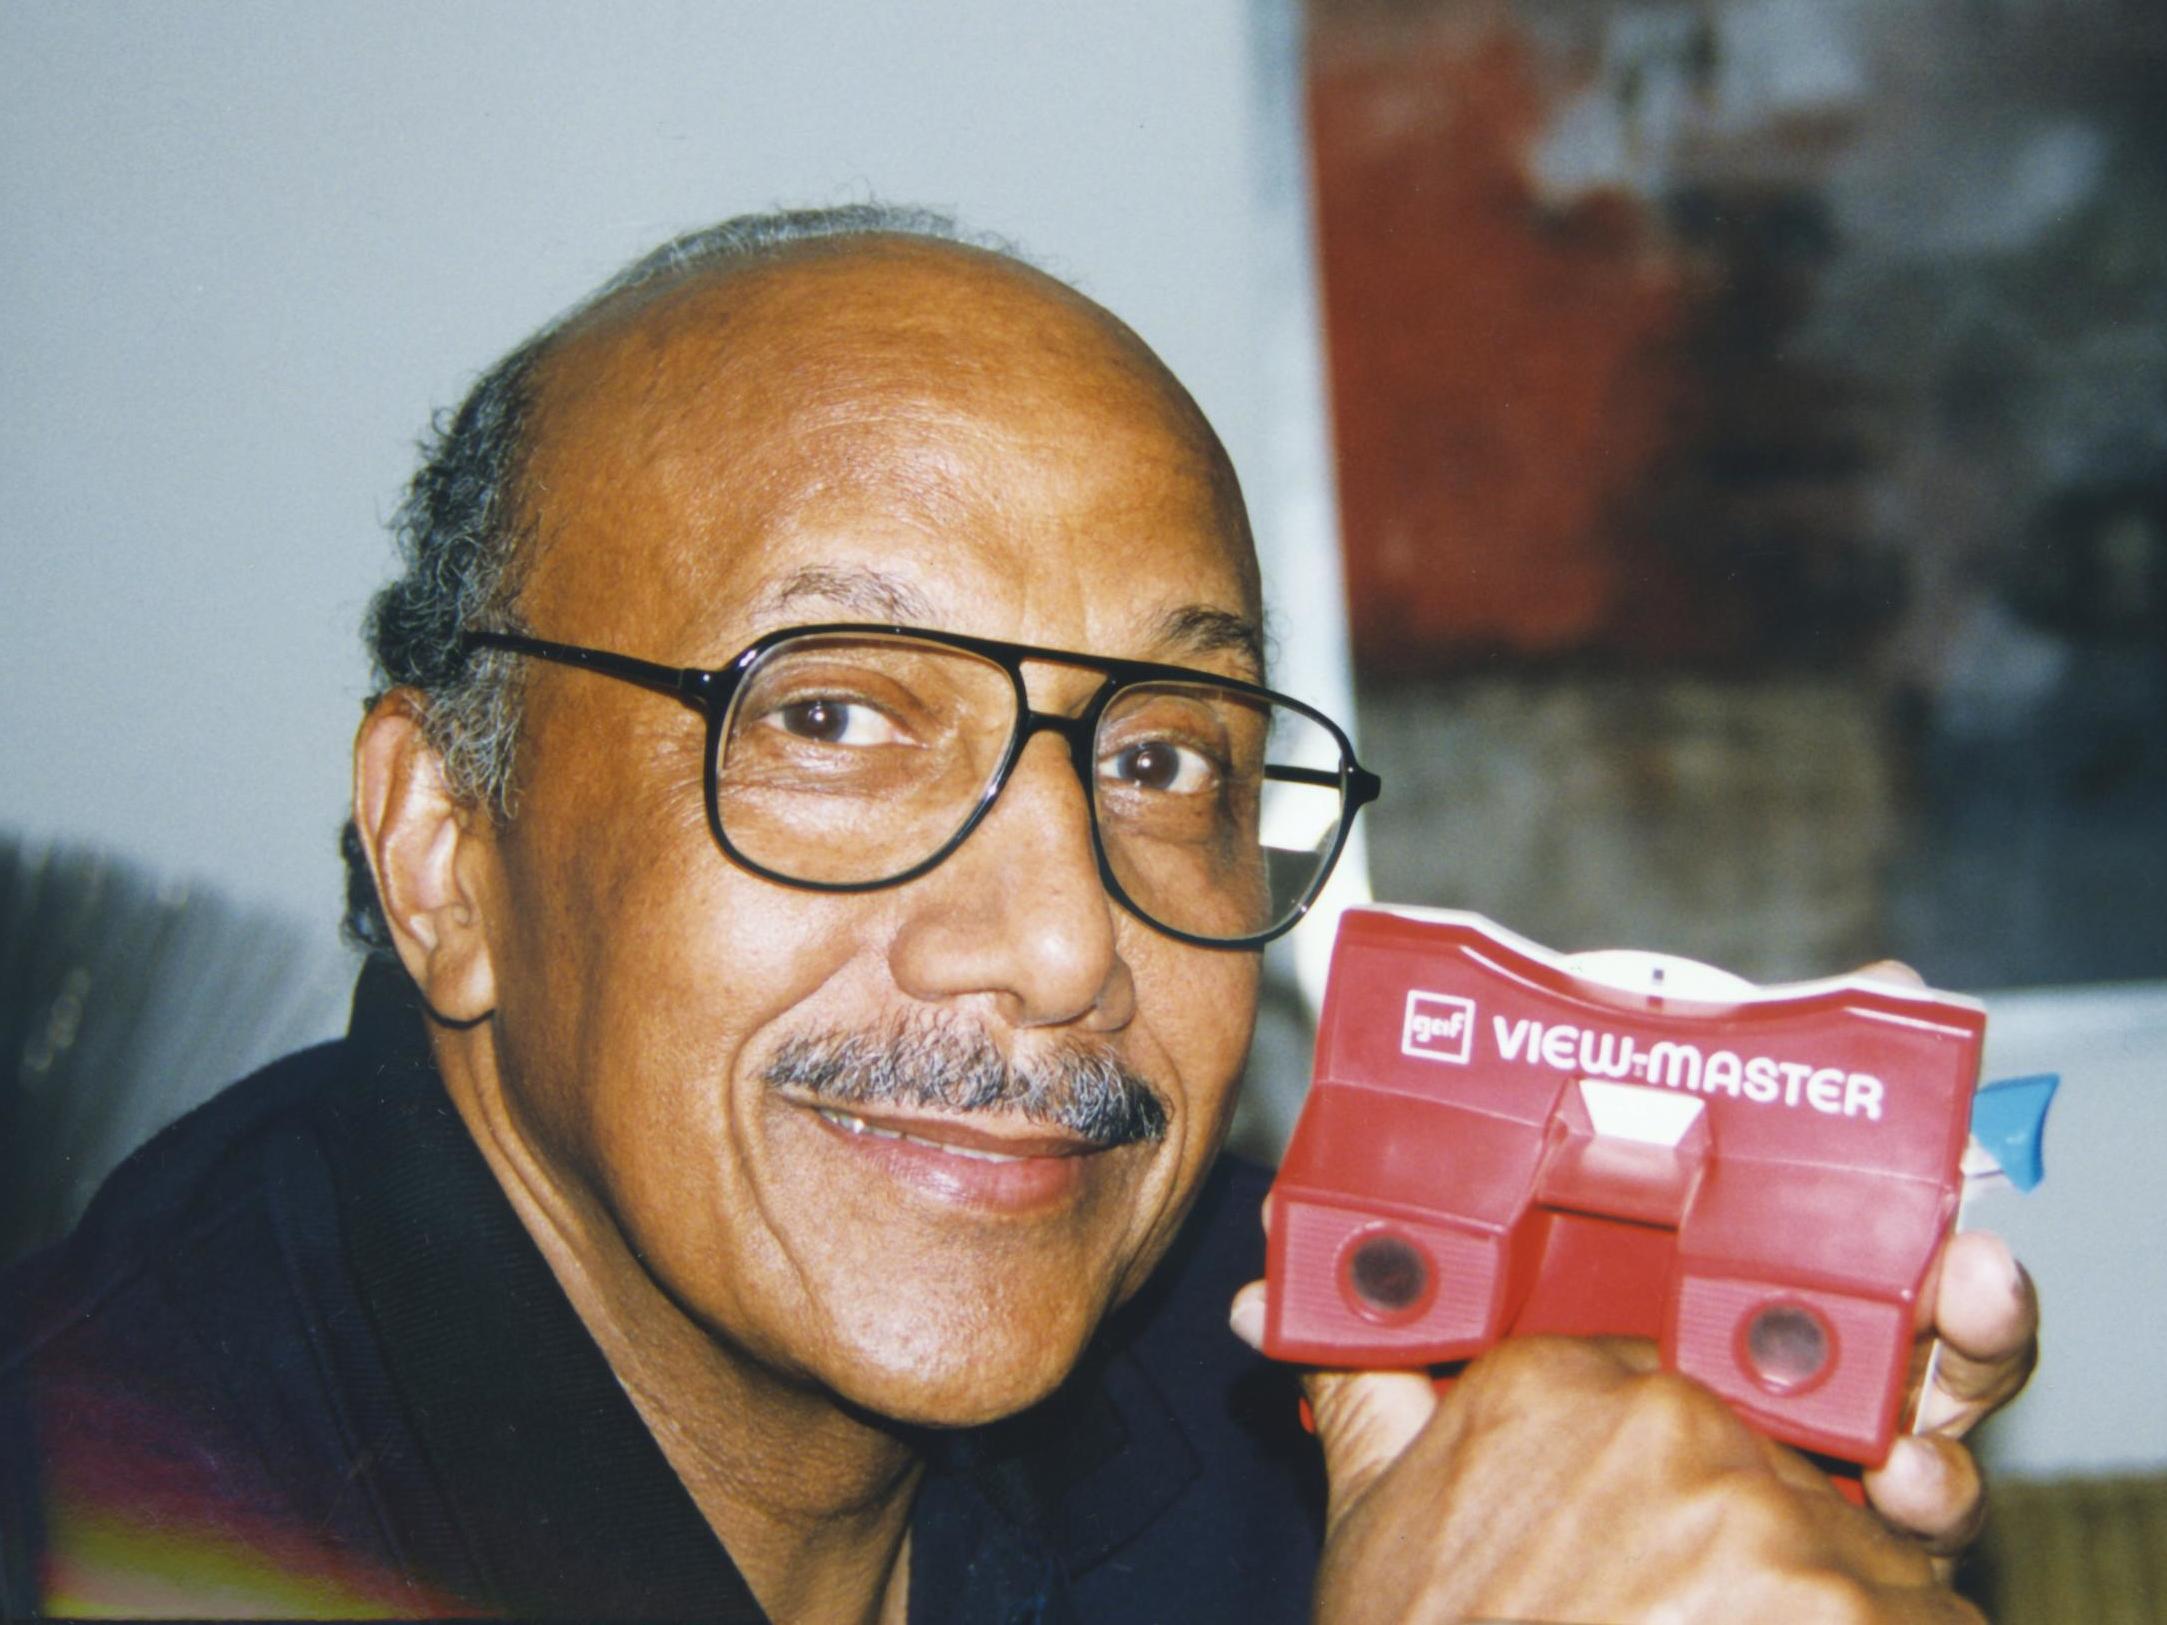 Harrison in 1998 – 40 years after his redesign of the photo-viewing device